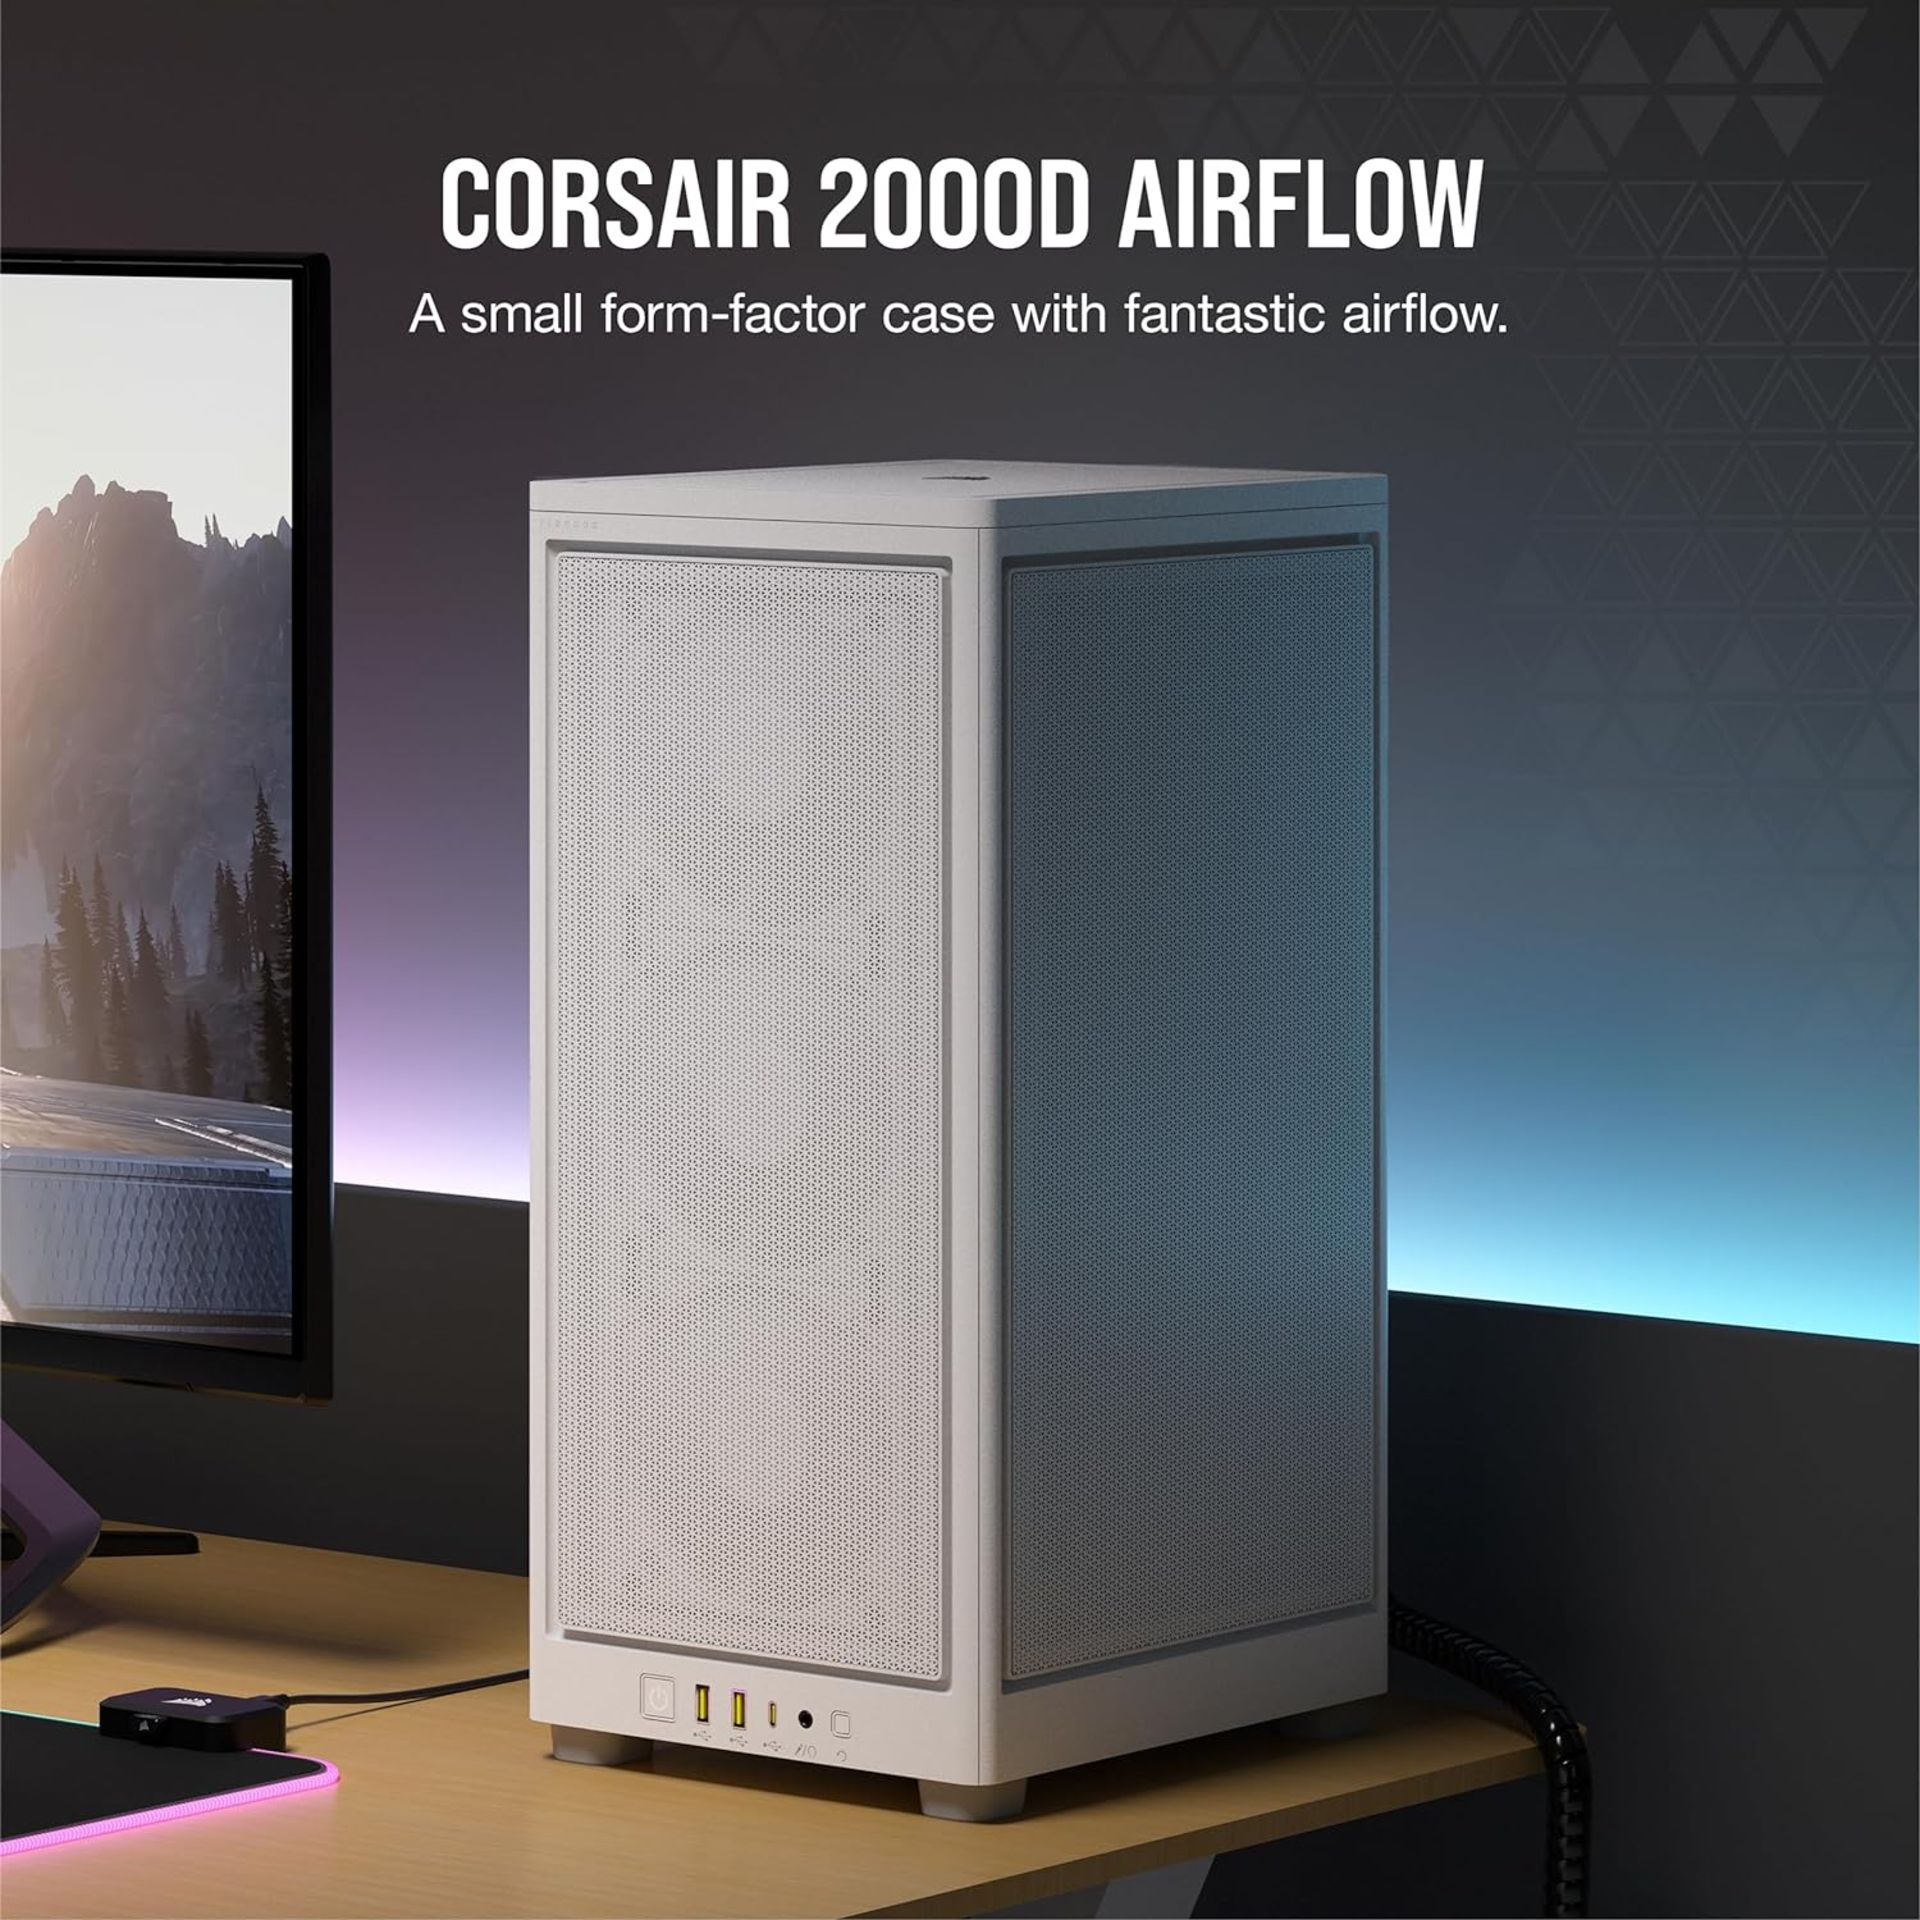 NEW & BOXED CORSAIR 2000D Airflow Mini-ITX PC Case - WHITE. RRP £99.99. (R15R). A Fitting Choice: - Image 2 of 8